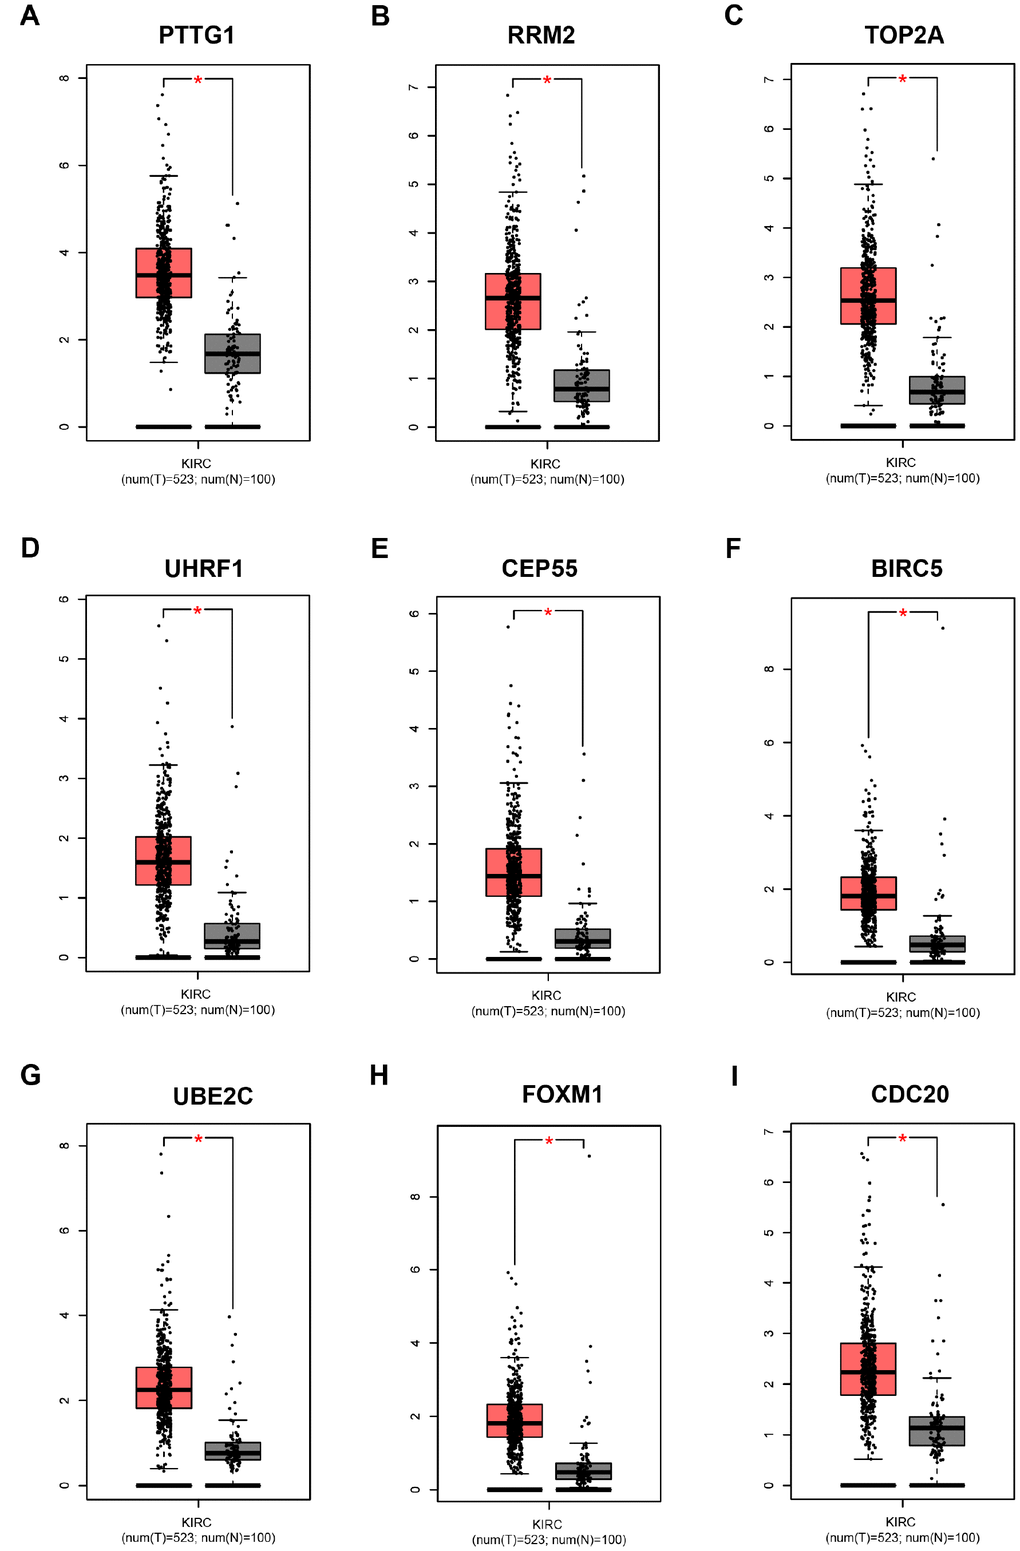 Validation of the gene expression levels of PTTG1, RRM2, TOP2A, UHRF1, CEP55, BIRC5, UBE2C, FOXM1 and CDC20 between normal kidney and ccRCC tissues in GEPIA database. (A–I) PTTG1, RRM2, TOP2A, UHRF1, CEP55, BIRC5, UBE2C, FOXM1 and CDC20 are significantly upregulated in ccRCC compared with normal tissues (P P 